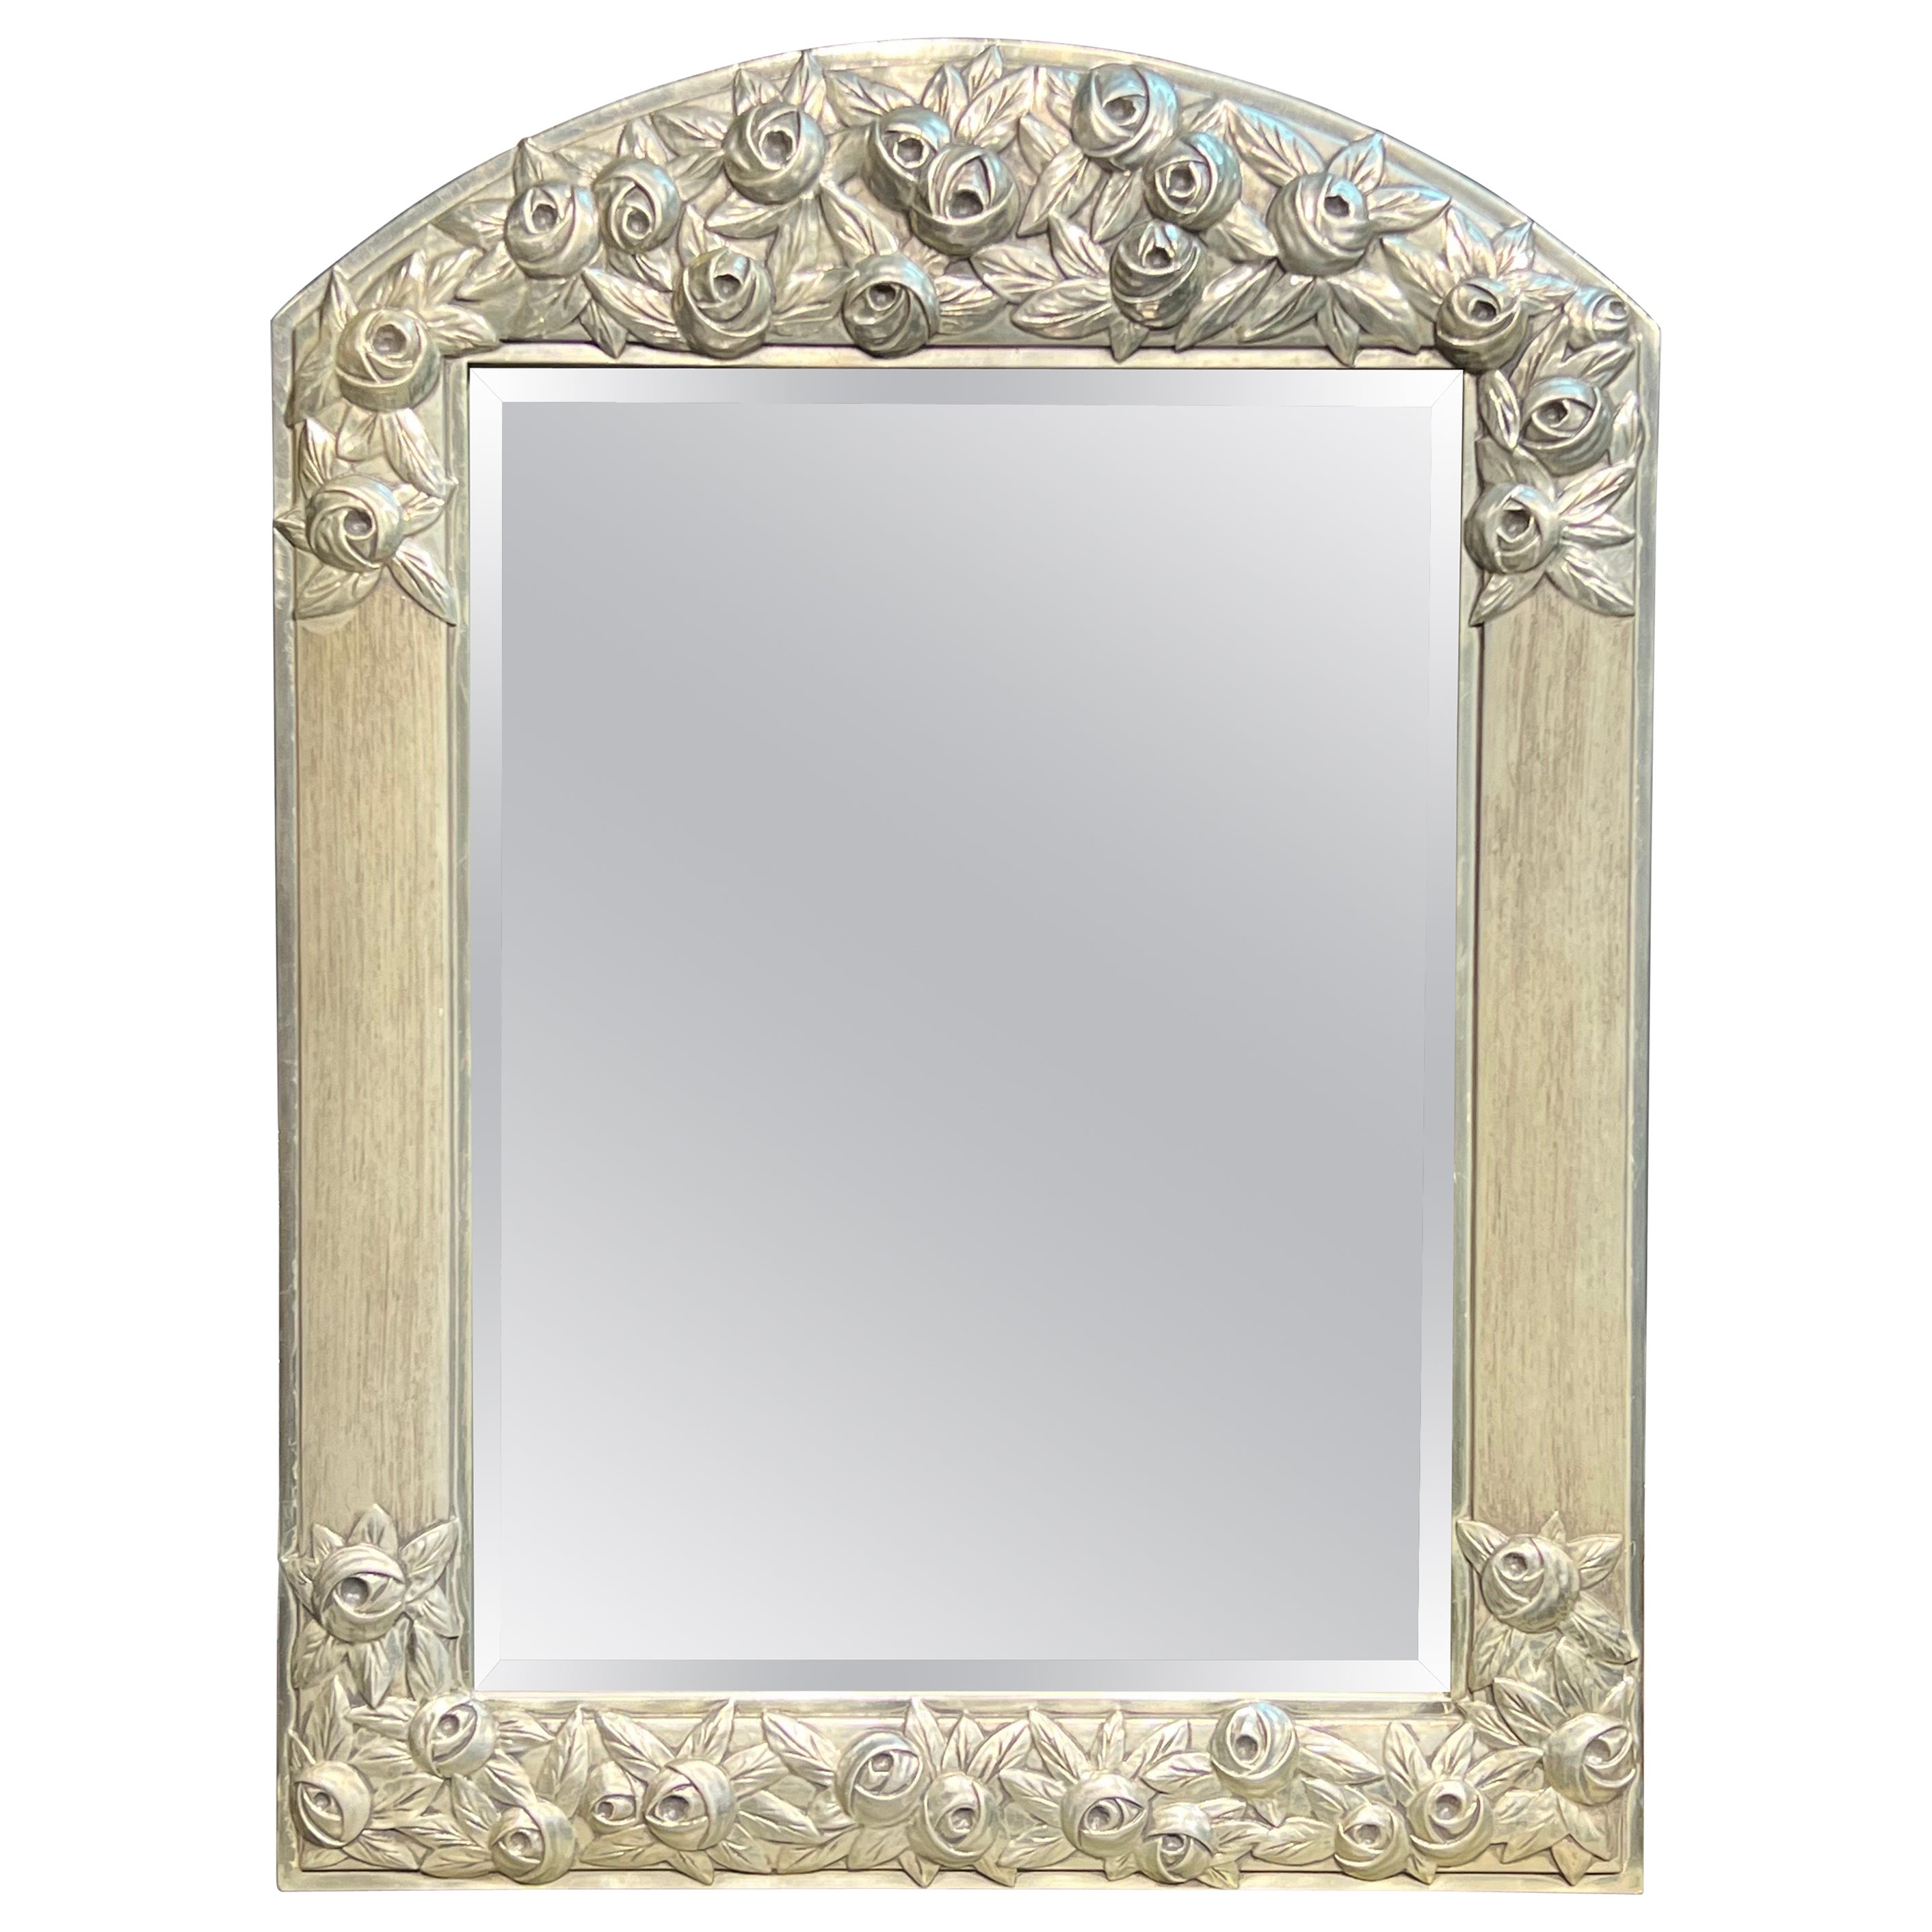 20th Century French Art Deco Hand Carved Wooden Mirror in Silver Finished Frame For Sale